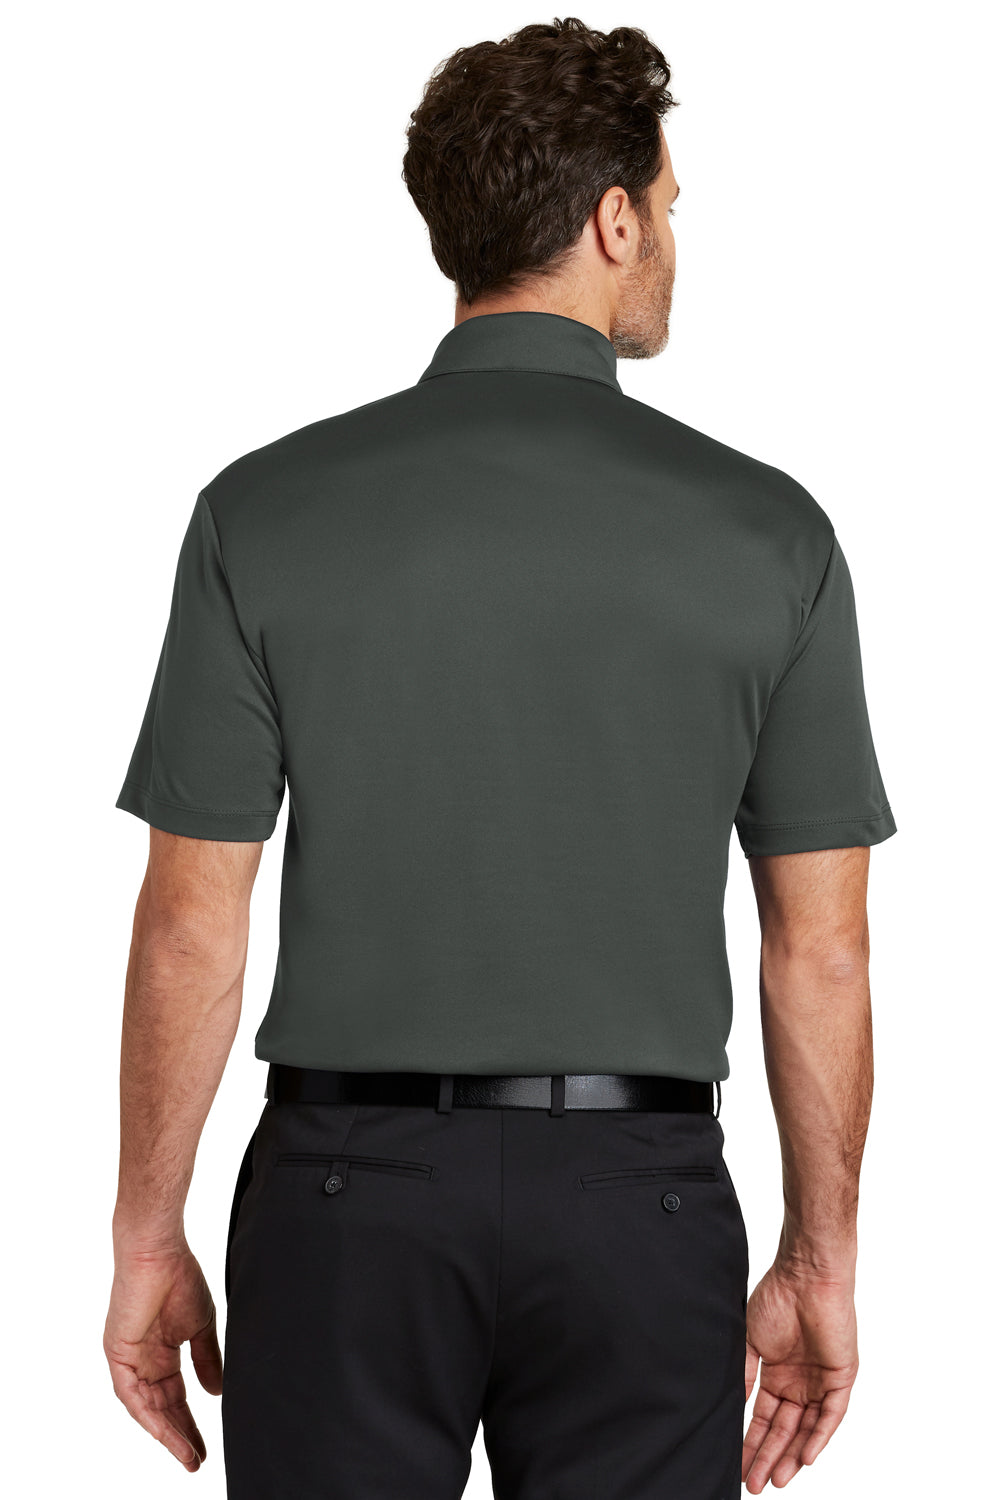 Port Authority K540 Mens Silk Touch Performance Moisture Wicking Short Sleeve Polo Shirt Steel Grey Back